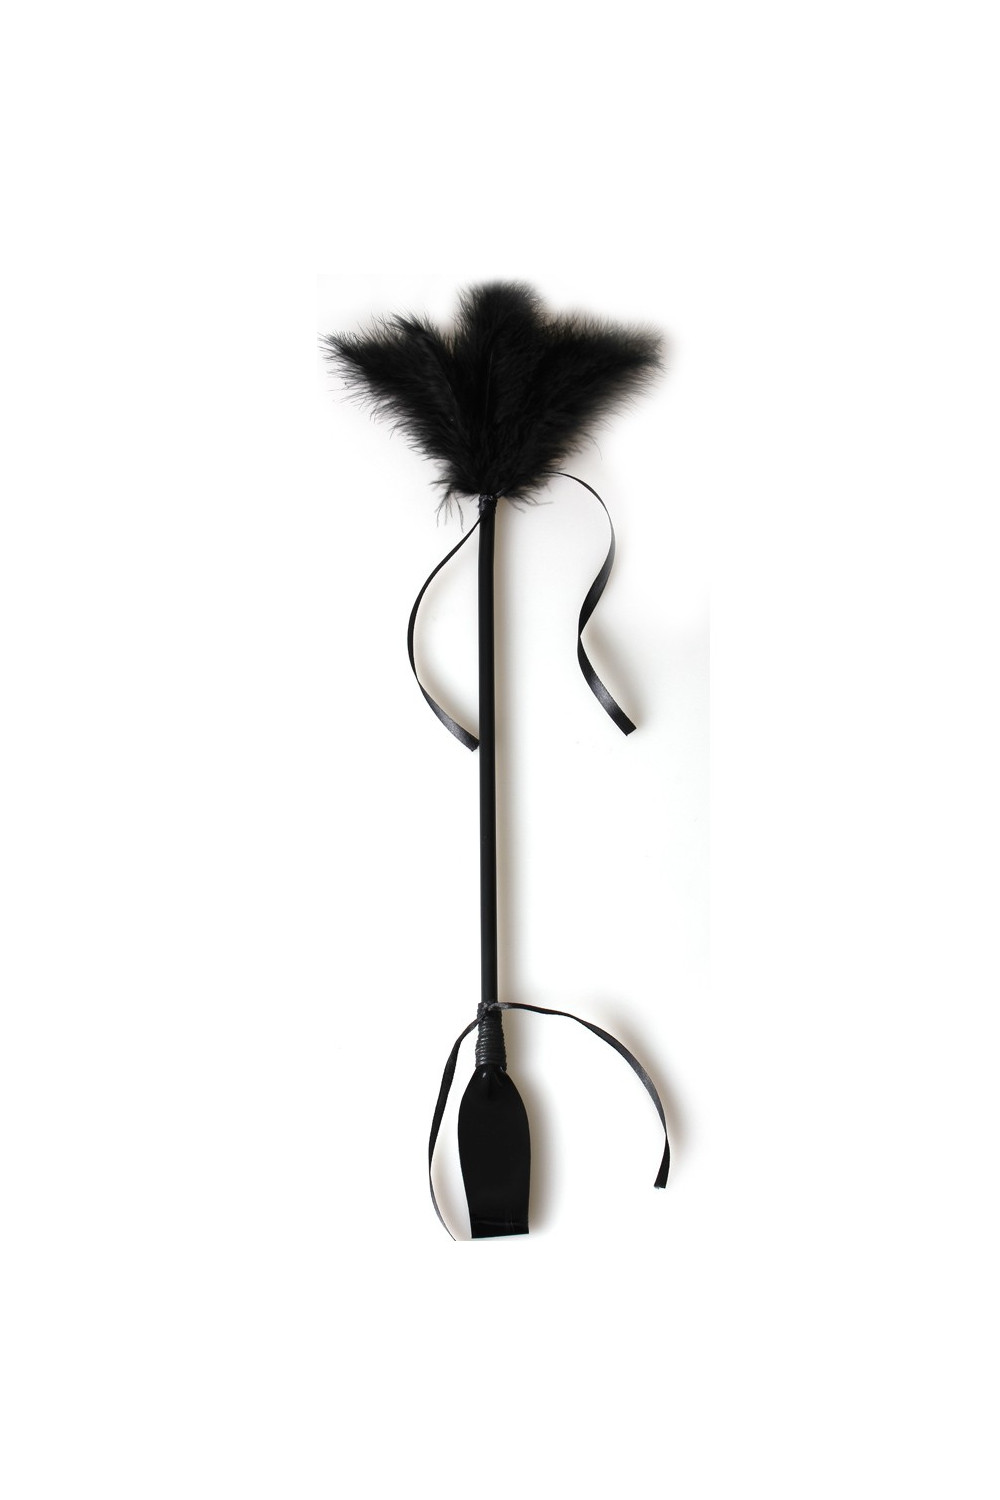 BLACK DUSTER AND RIDING CROP